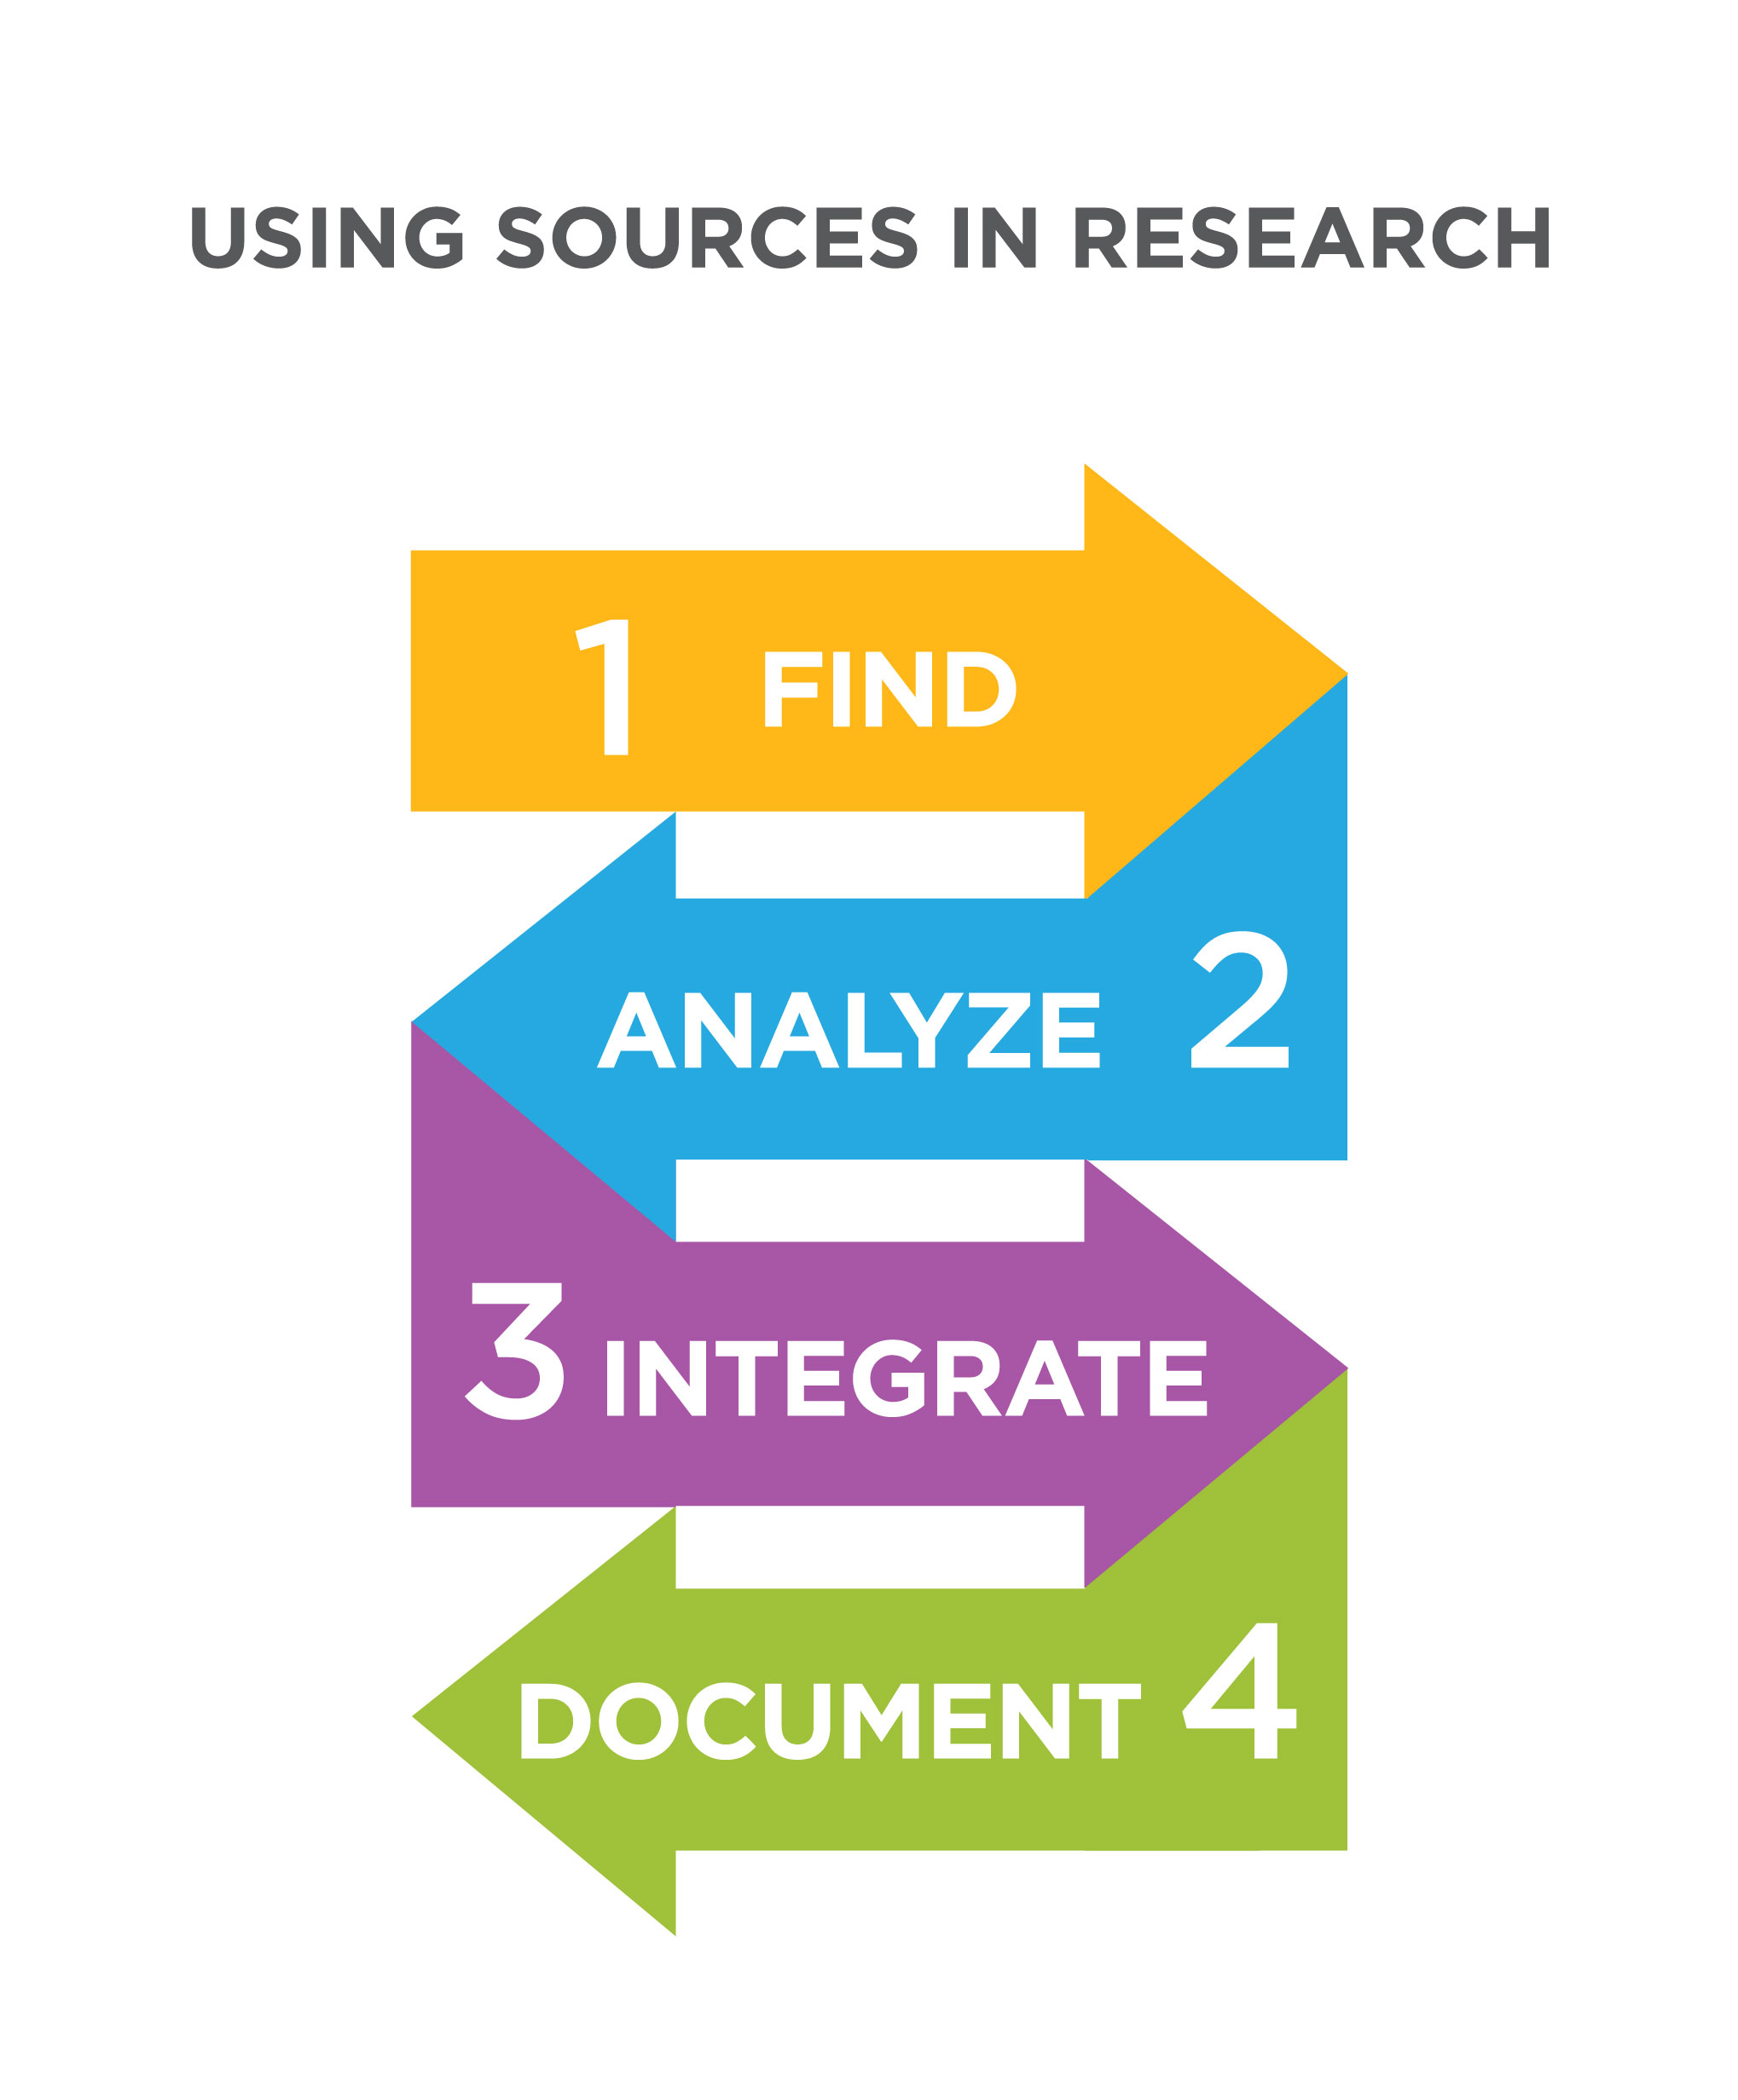 Using sources in research: find, analyze, integrate, document.